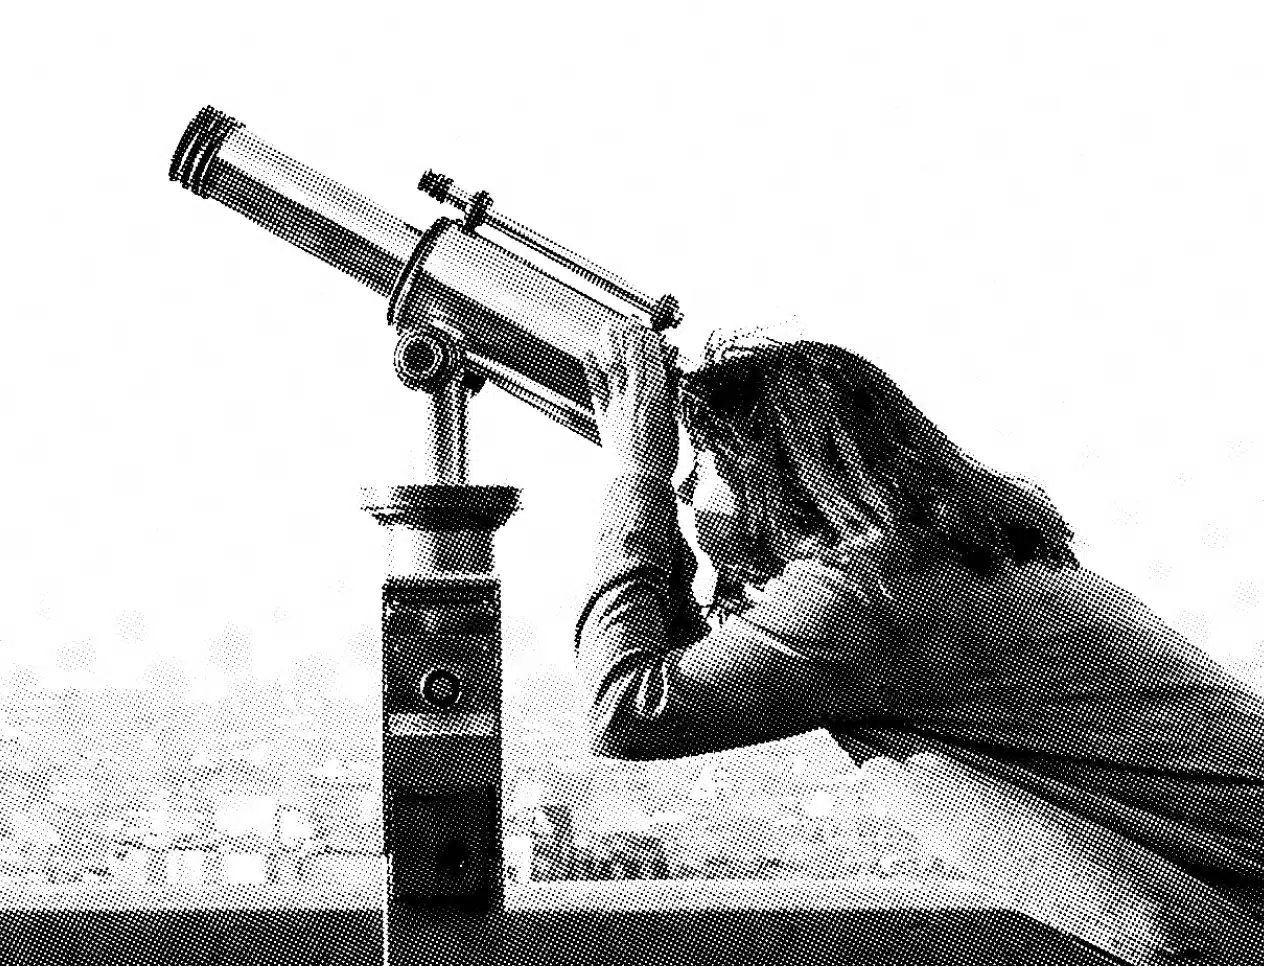 A monochrome image captures a person with medium-length hair approaching a large, mounted telescope. Positioned at an outdoor observation point, they gaze intently through the lens. The background remains blurred, emphasizing their focus on the celestial view.